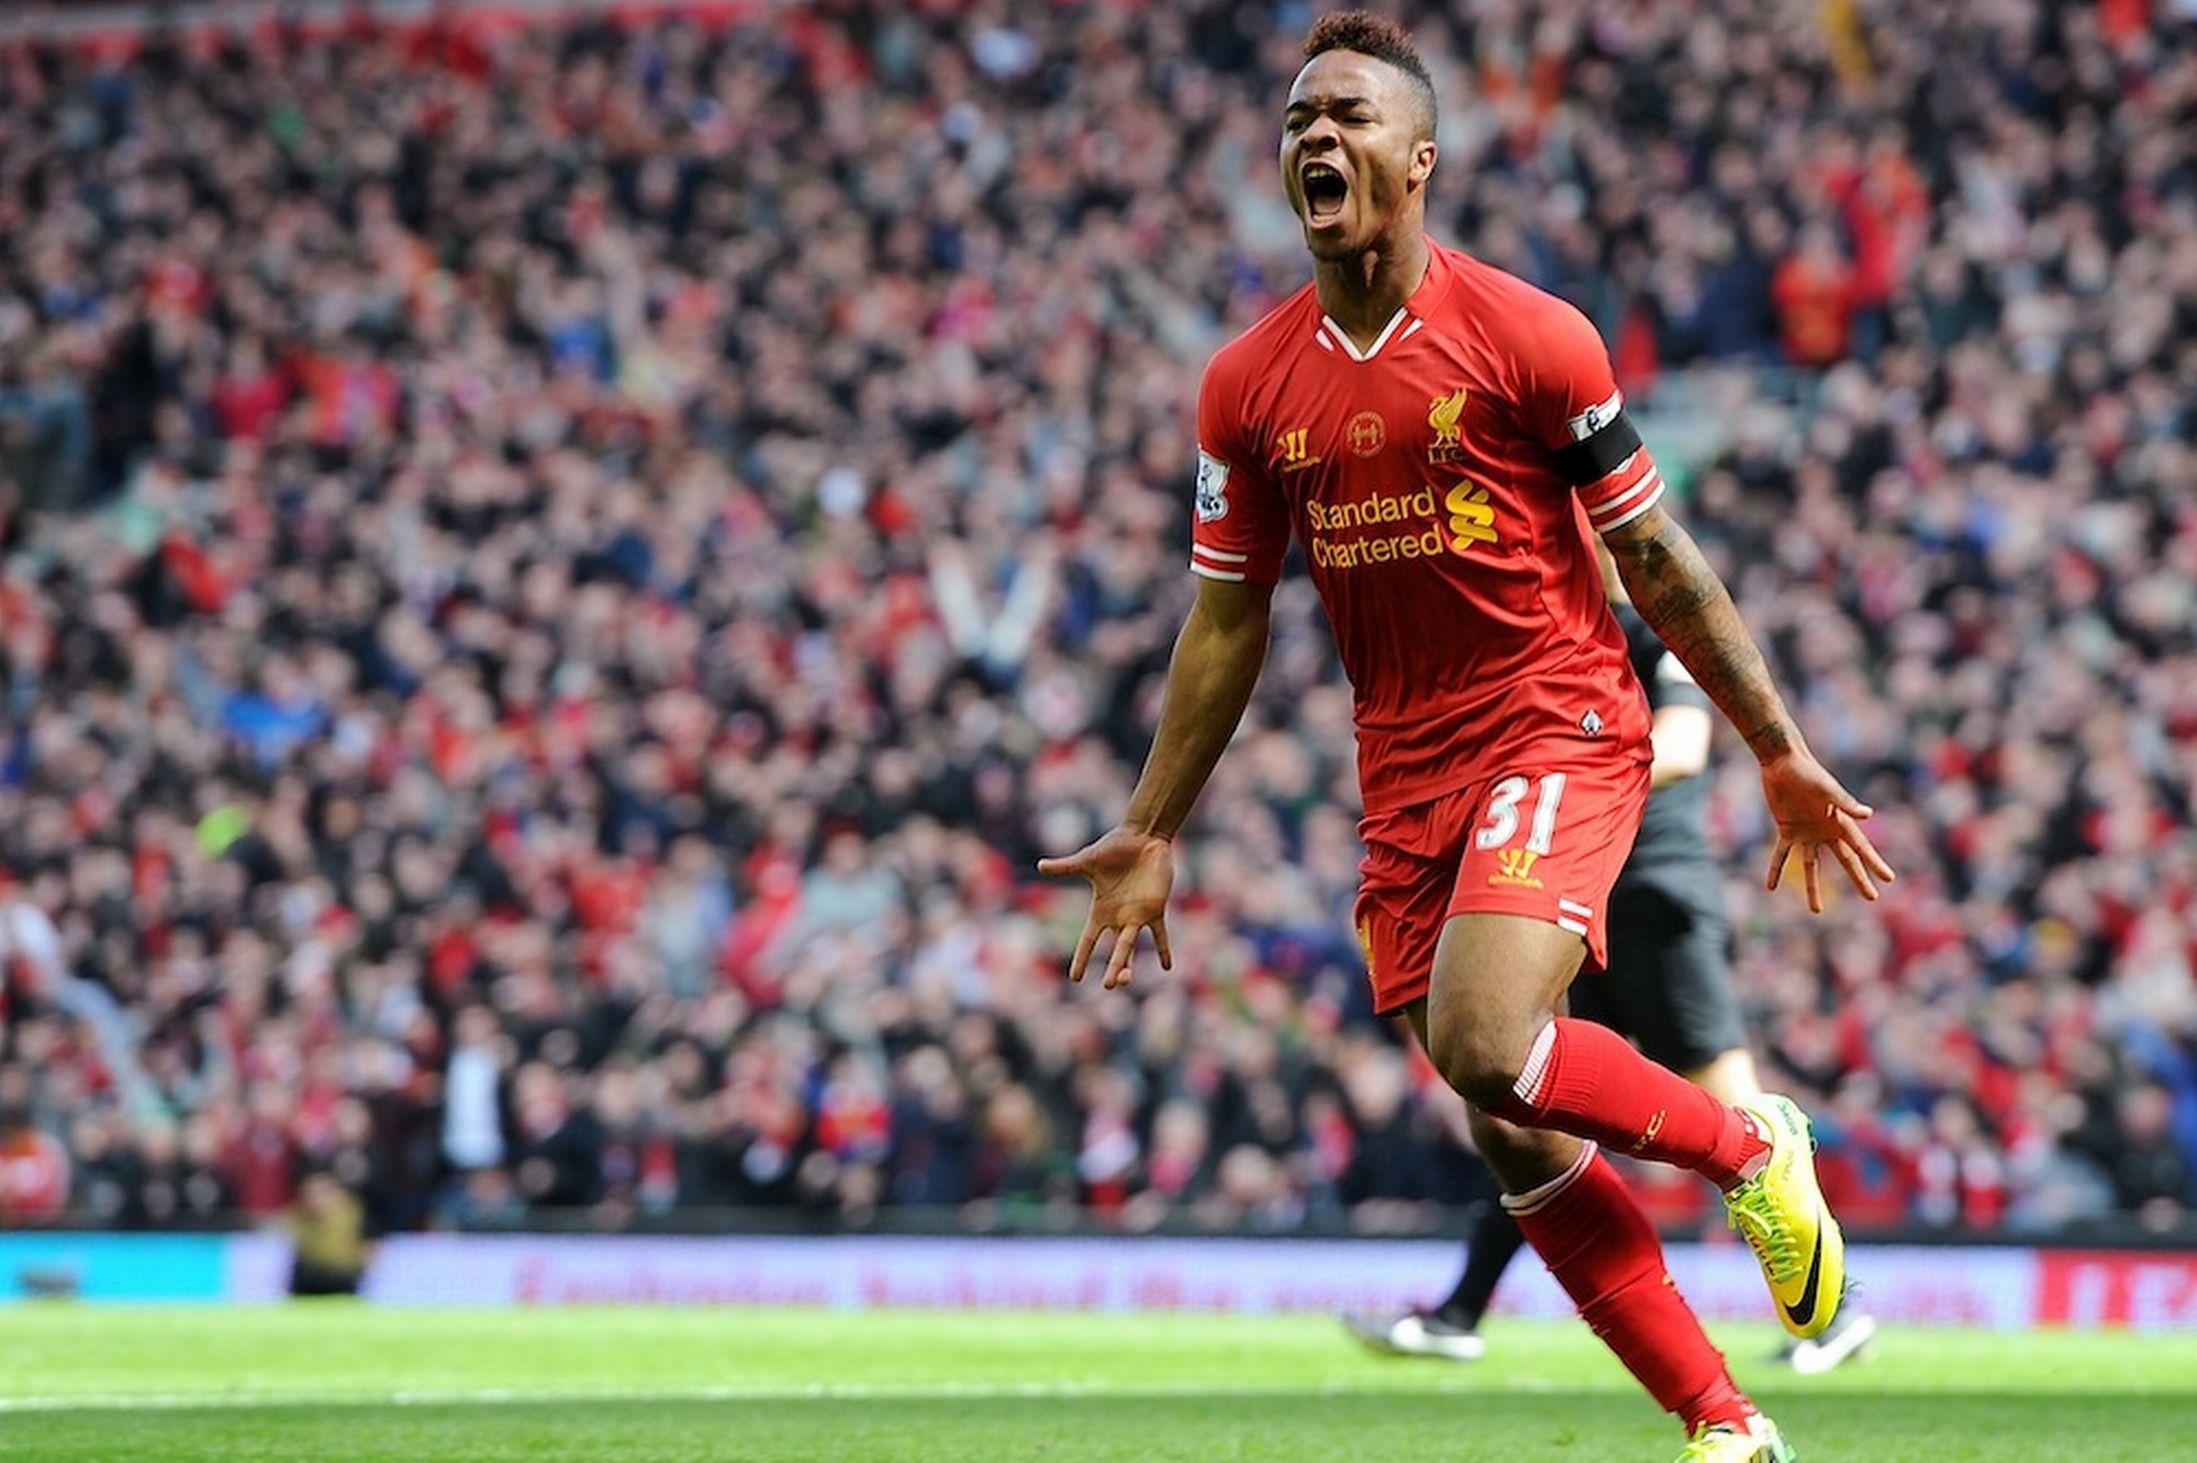 Raheem Sterling Wallpaper Image Photo Picture Background